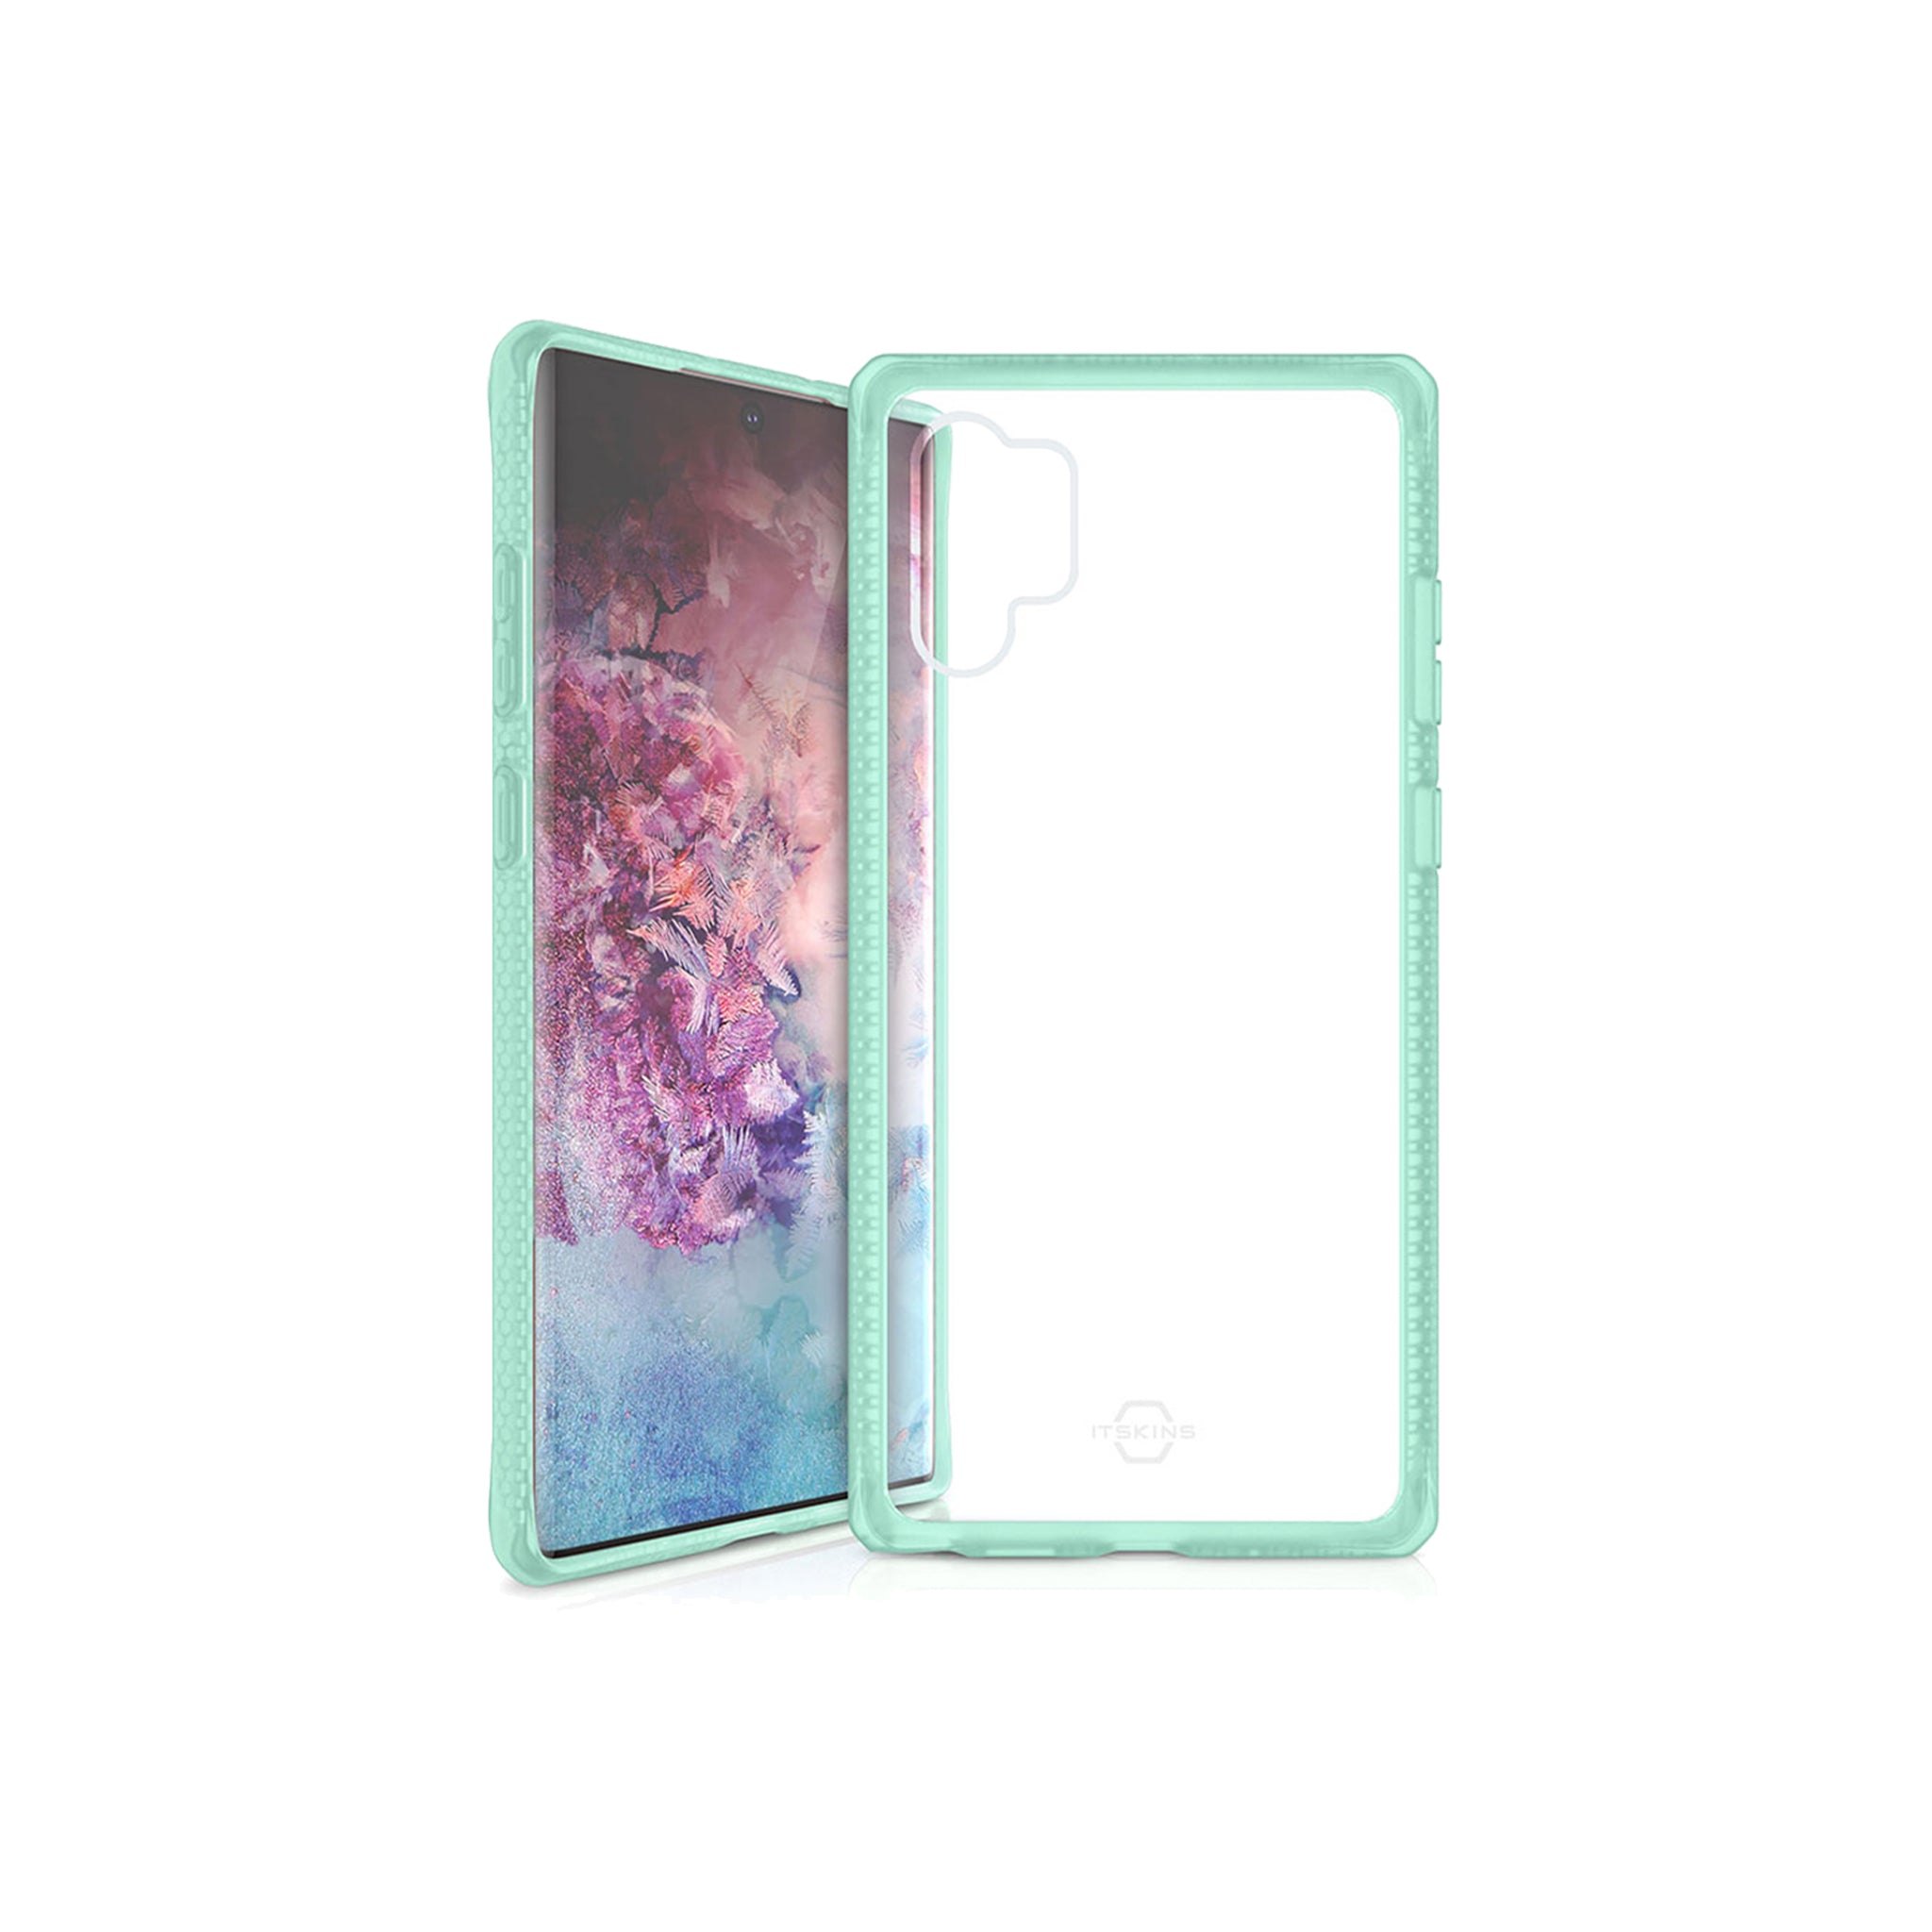 Itskins - Hybrid Frost Mkii Case For Samsung Galaxy Note 10 Plus - Tiffany Green And Transparent